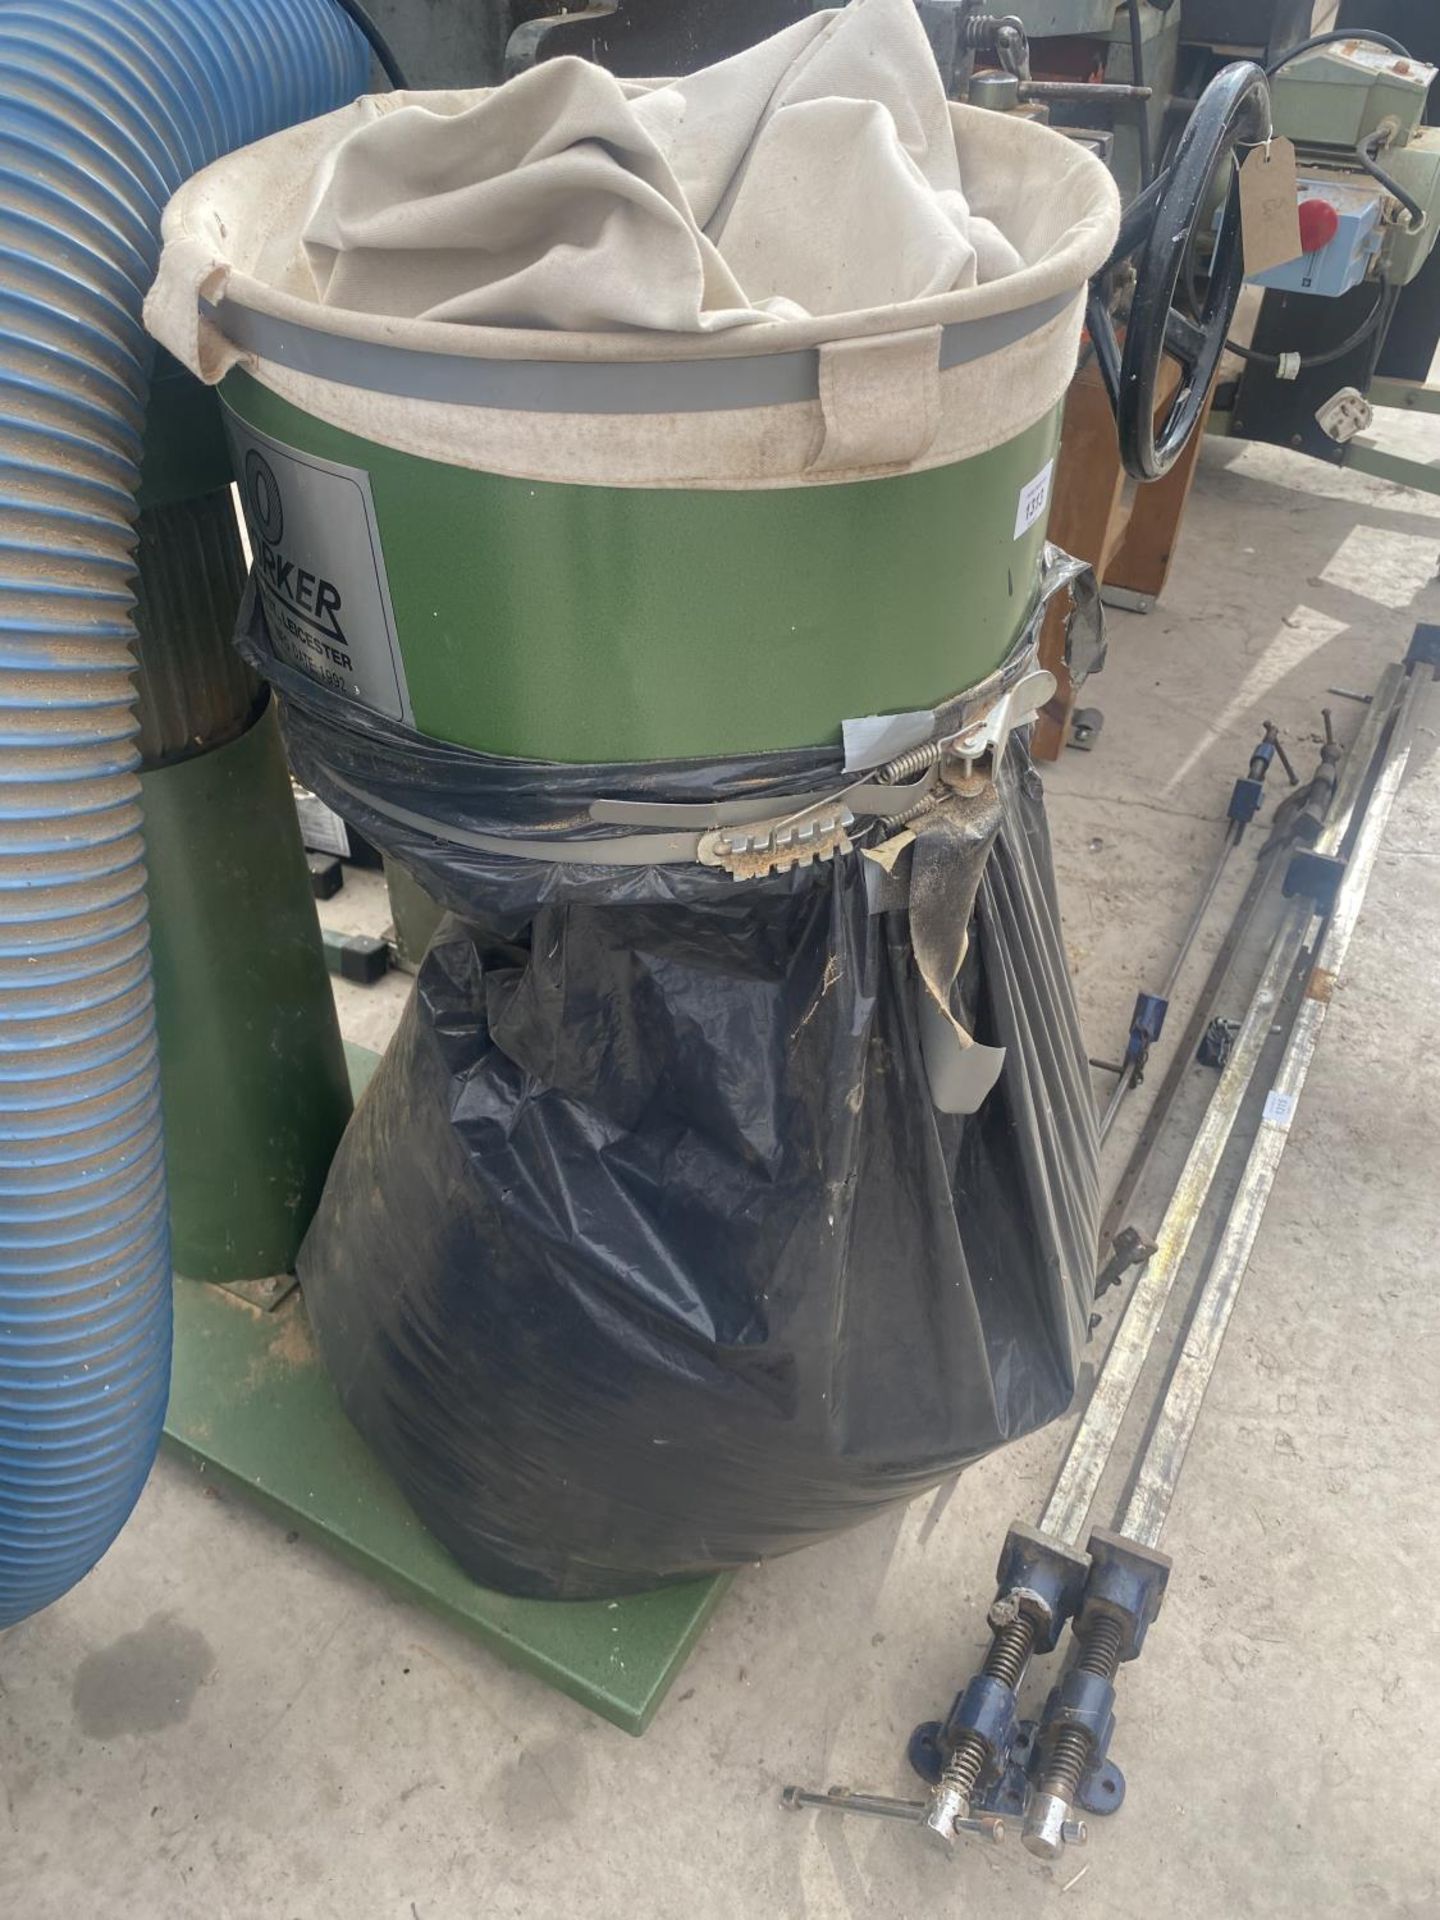 A WOODWORKER W890 DUST EXTRACTOR BELIEVED IN WORKING ORDER BUT NO WARRANTY - Image 4 of 5